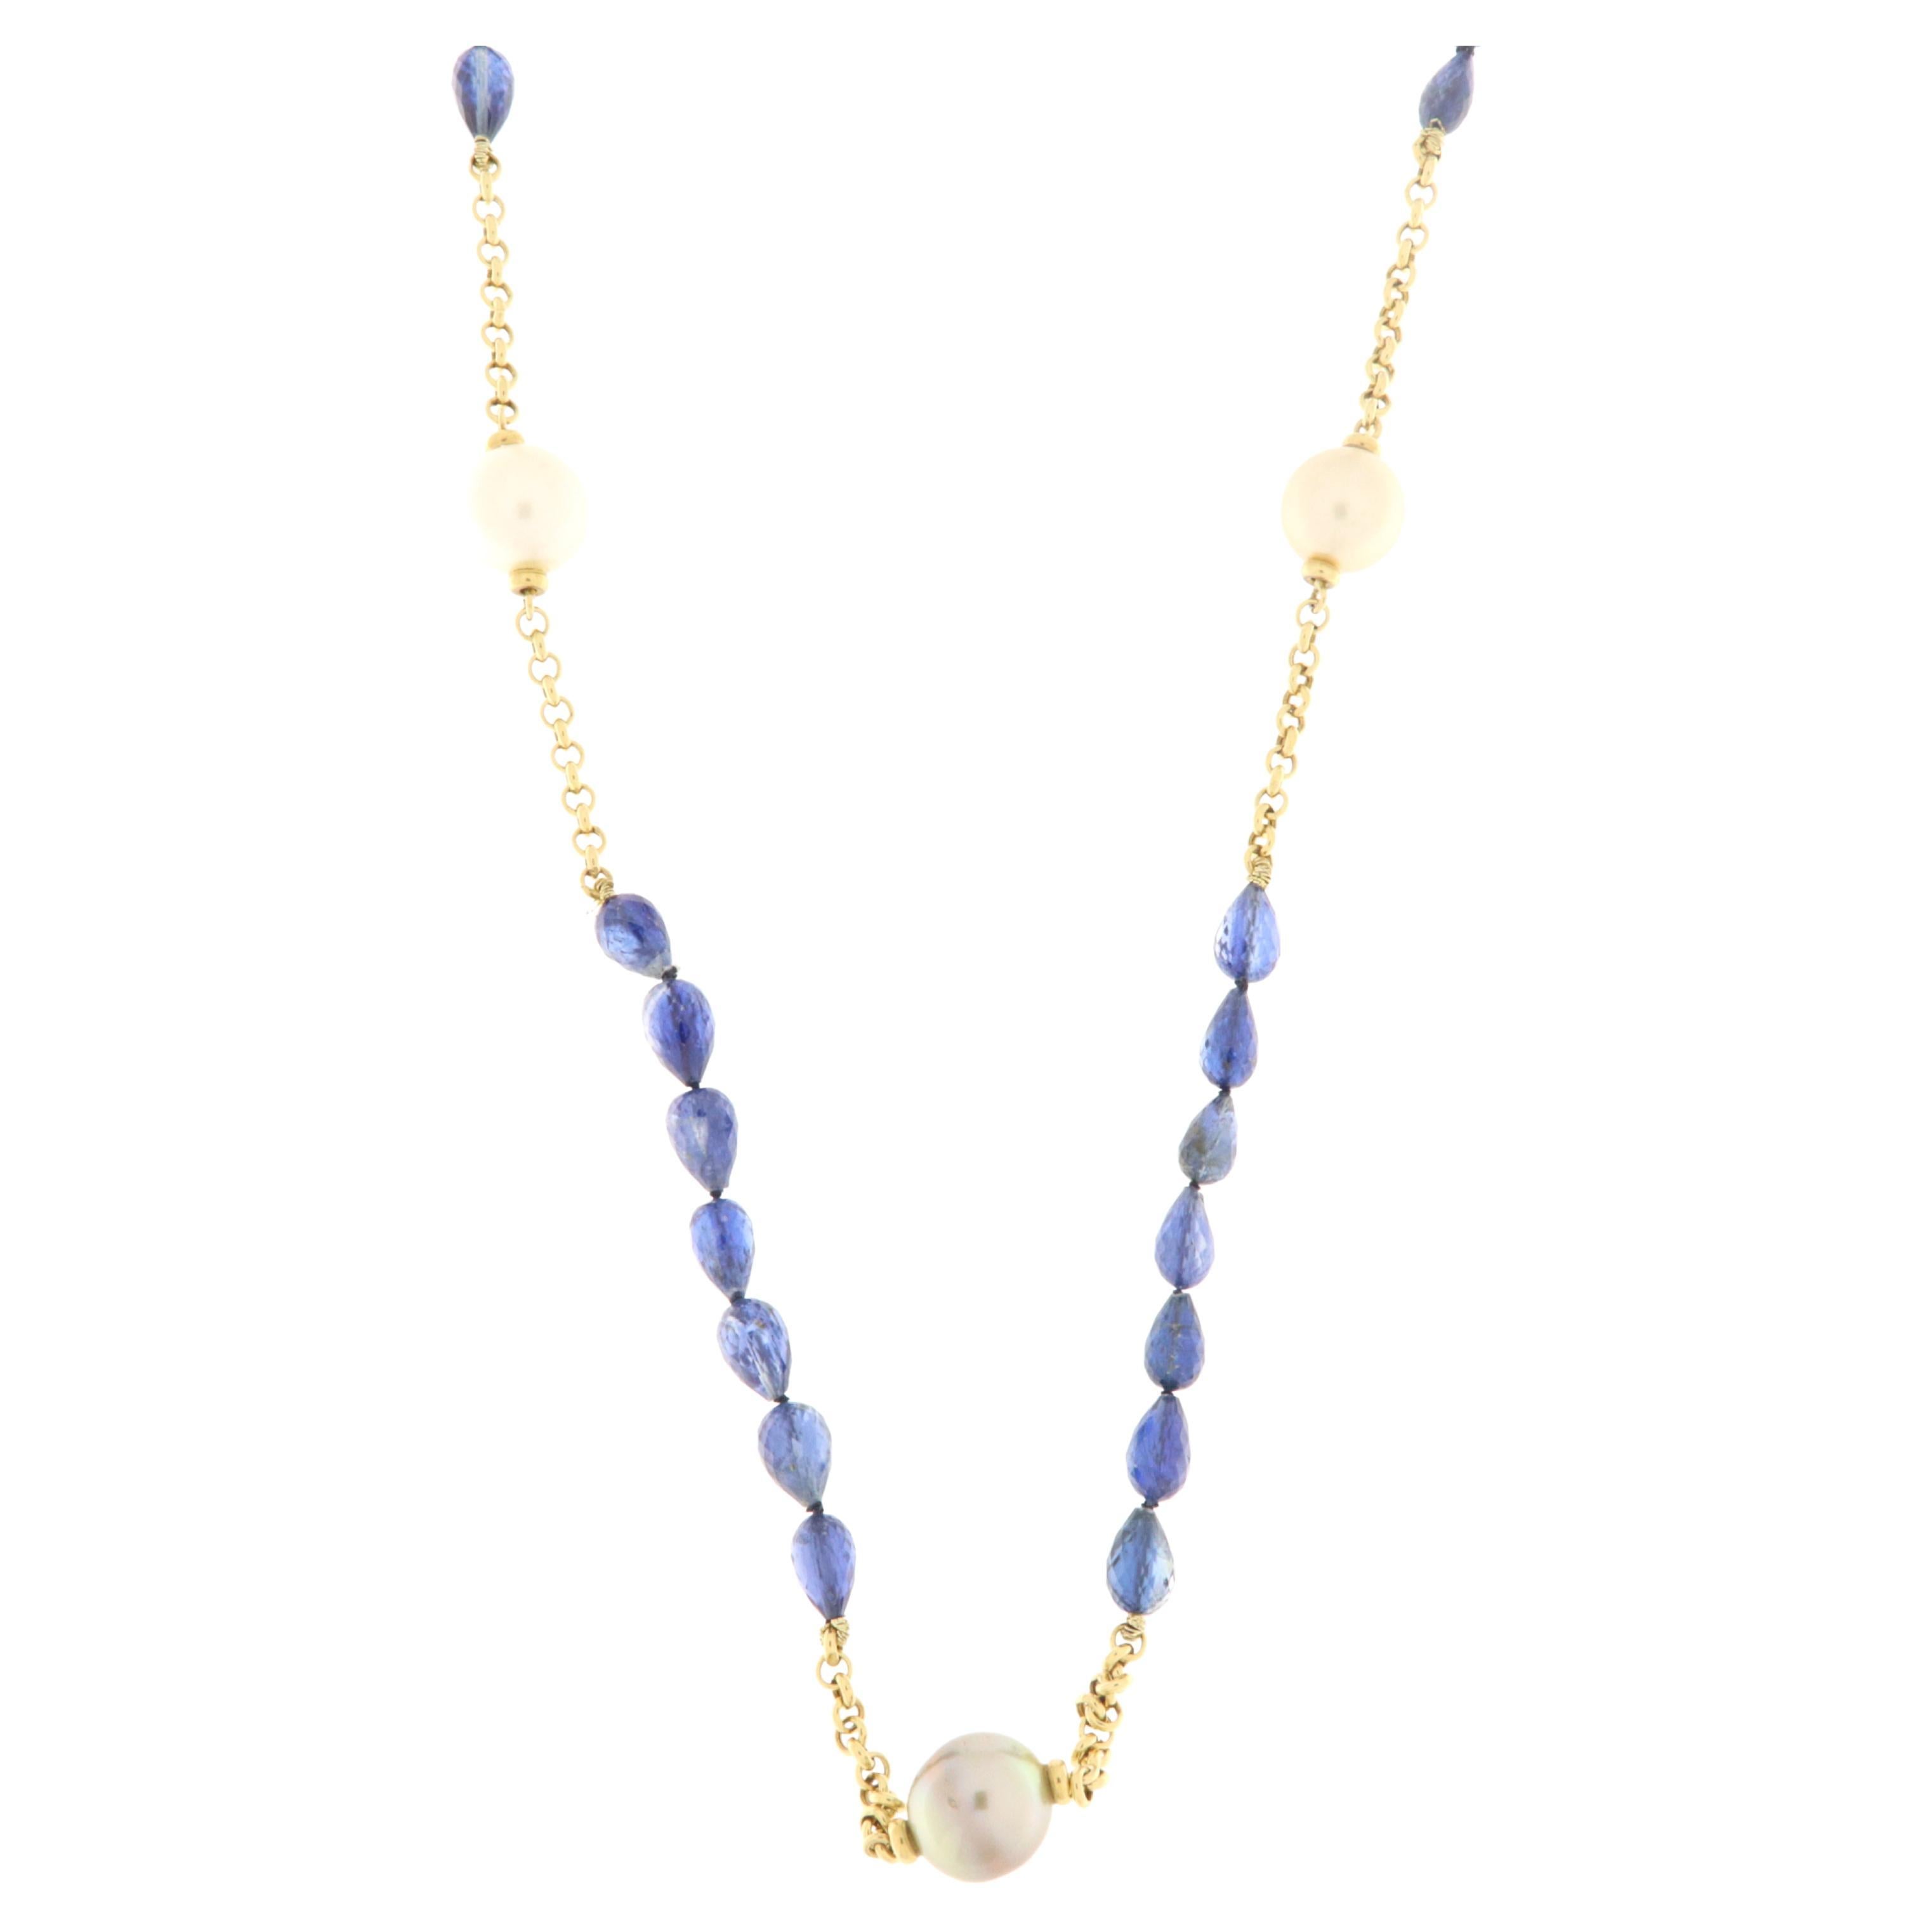 Yellow gold necklace 80 cm long. It alternates gold chain with faceted drop cut kyanite elements and grey, white and gold Australian pearls. Very trendy in the combination of colors and easy to wear, both in the sporty and elegant version.